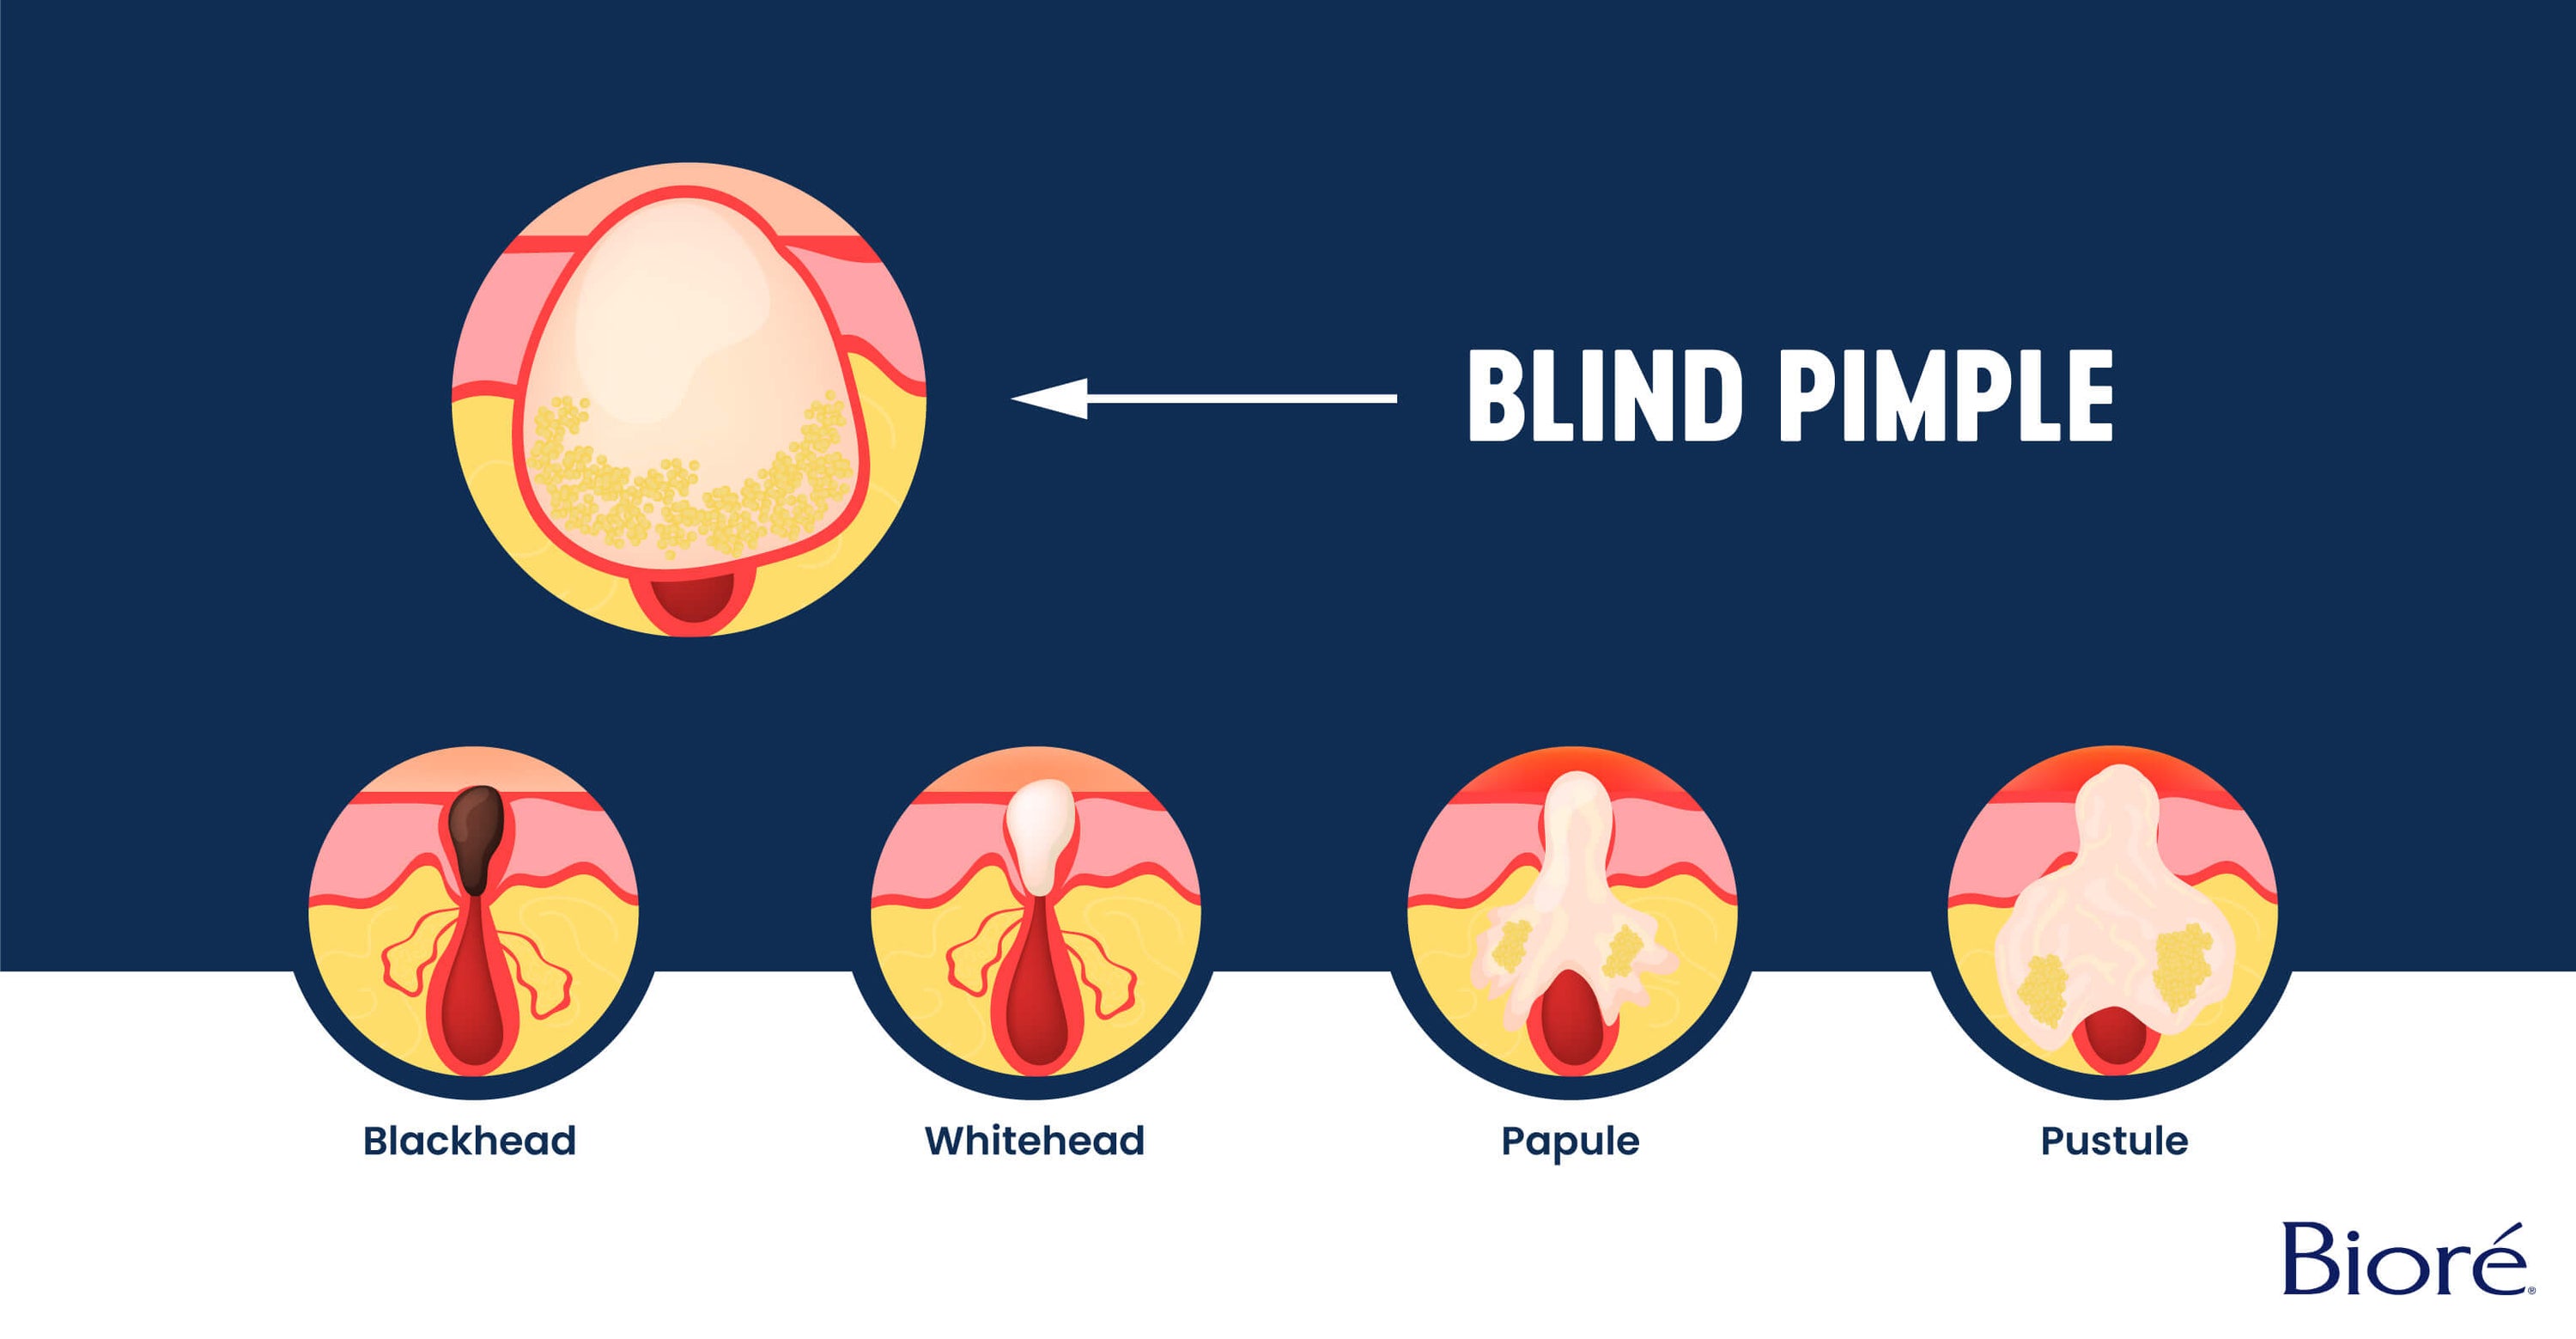 What Is a Blind Pimple?